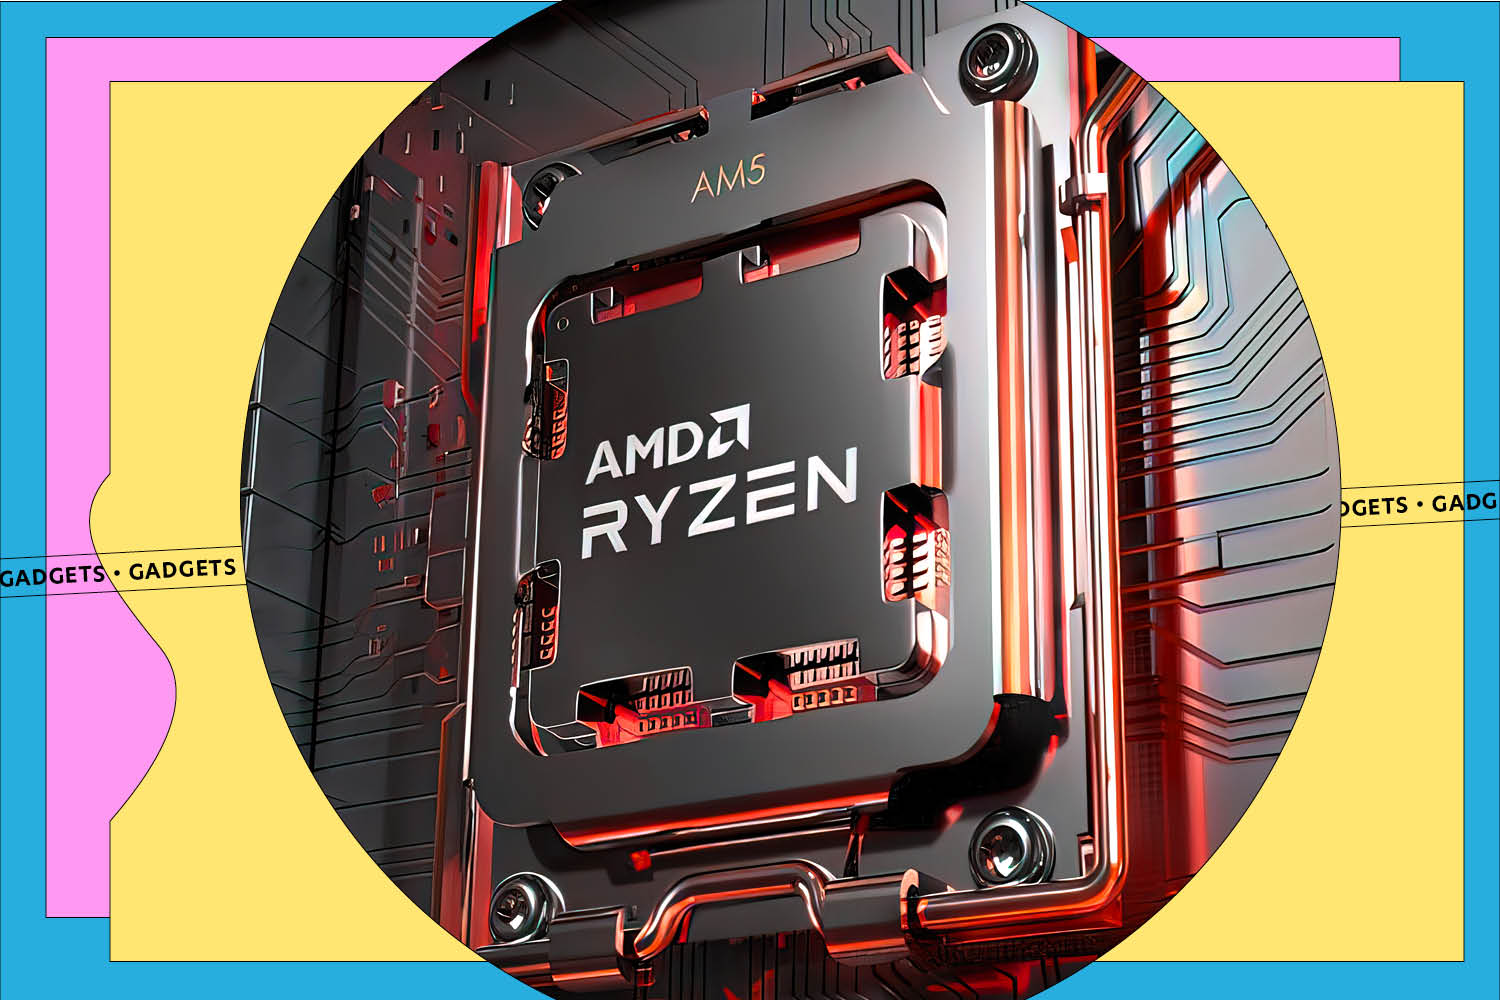 AMD's Ryzen 7000 Series CPUs are part of the Best of What's New of 2022.